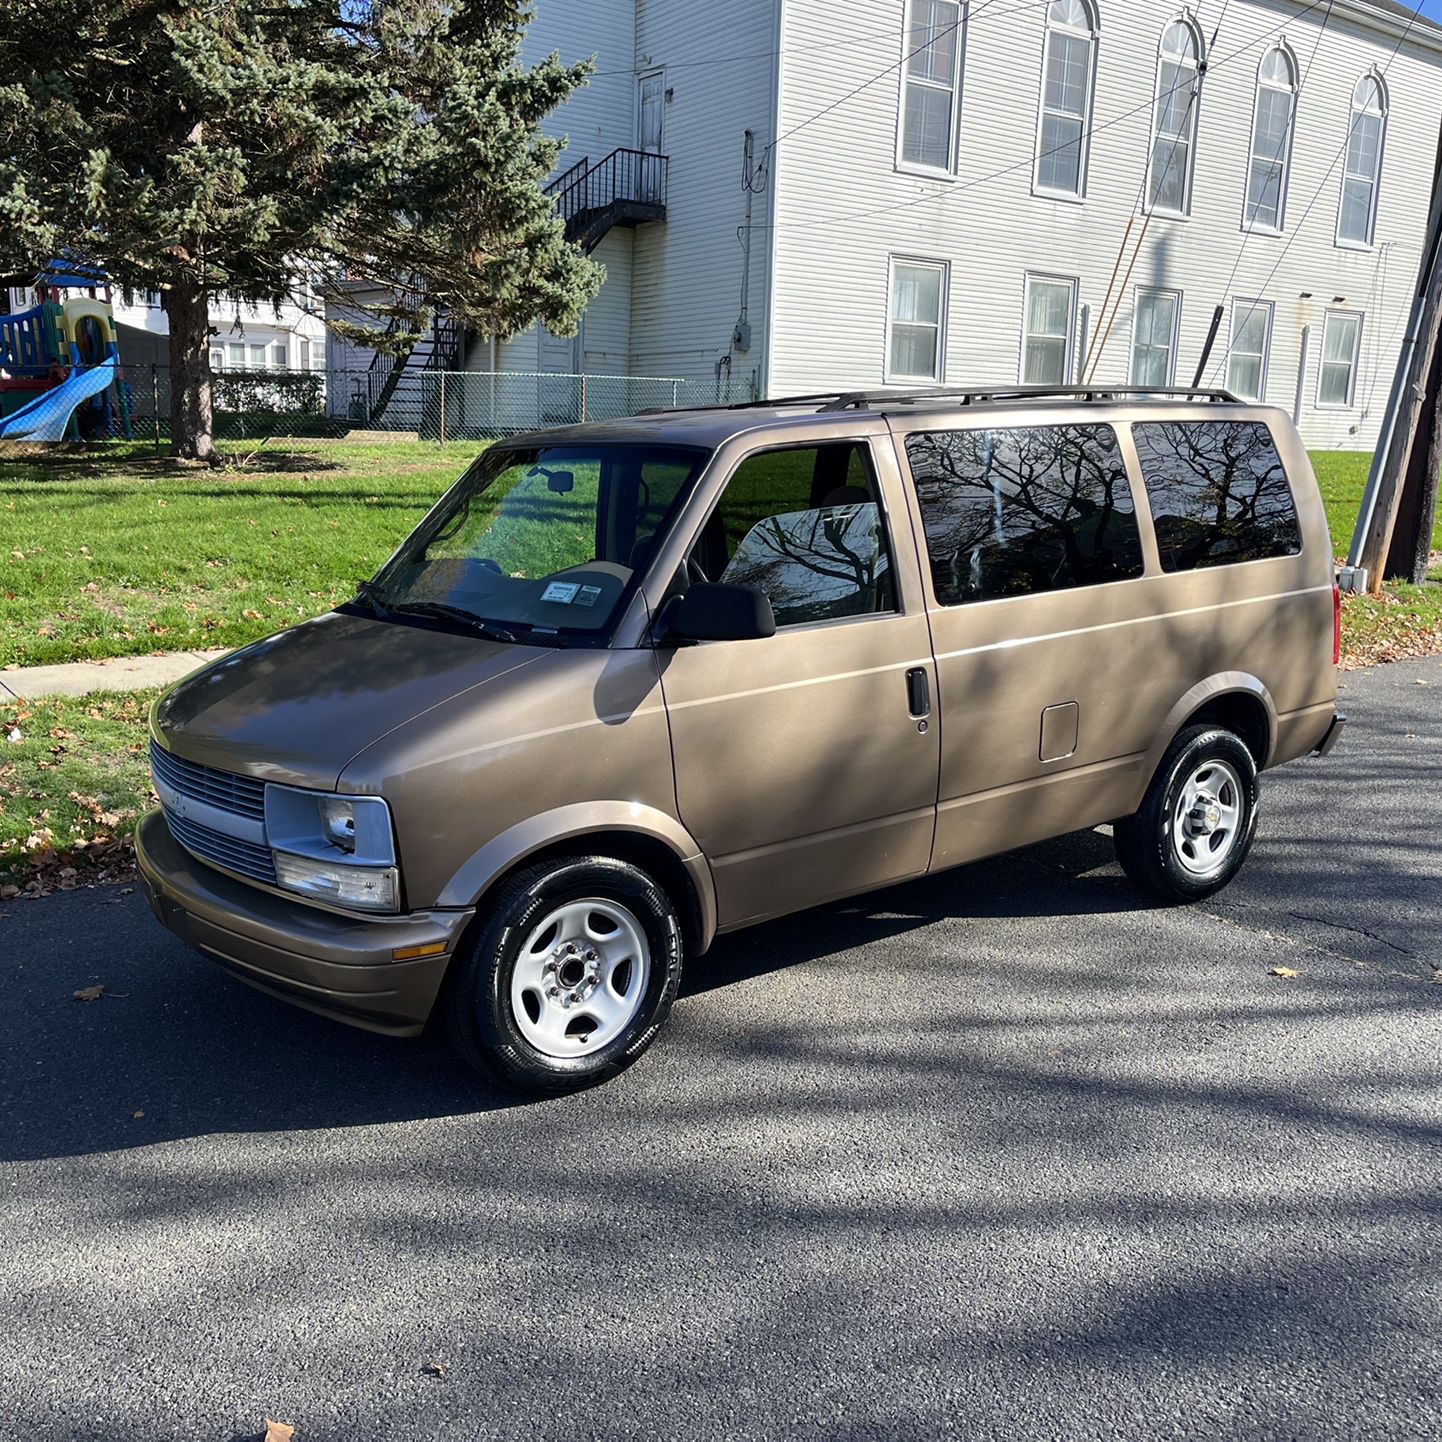 2004 Chevrolet Astro for Sale in Green Brook Township, NJ - OfferUp